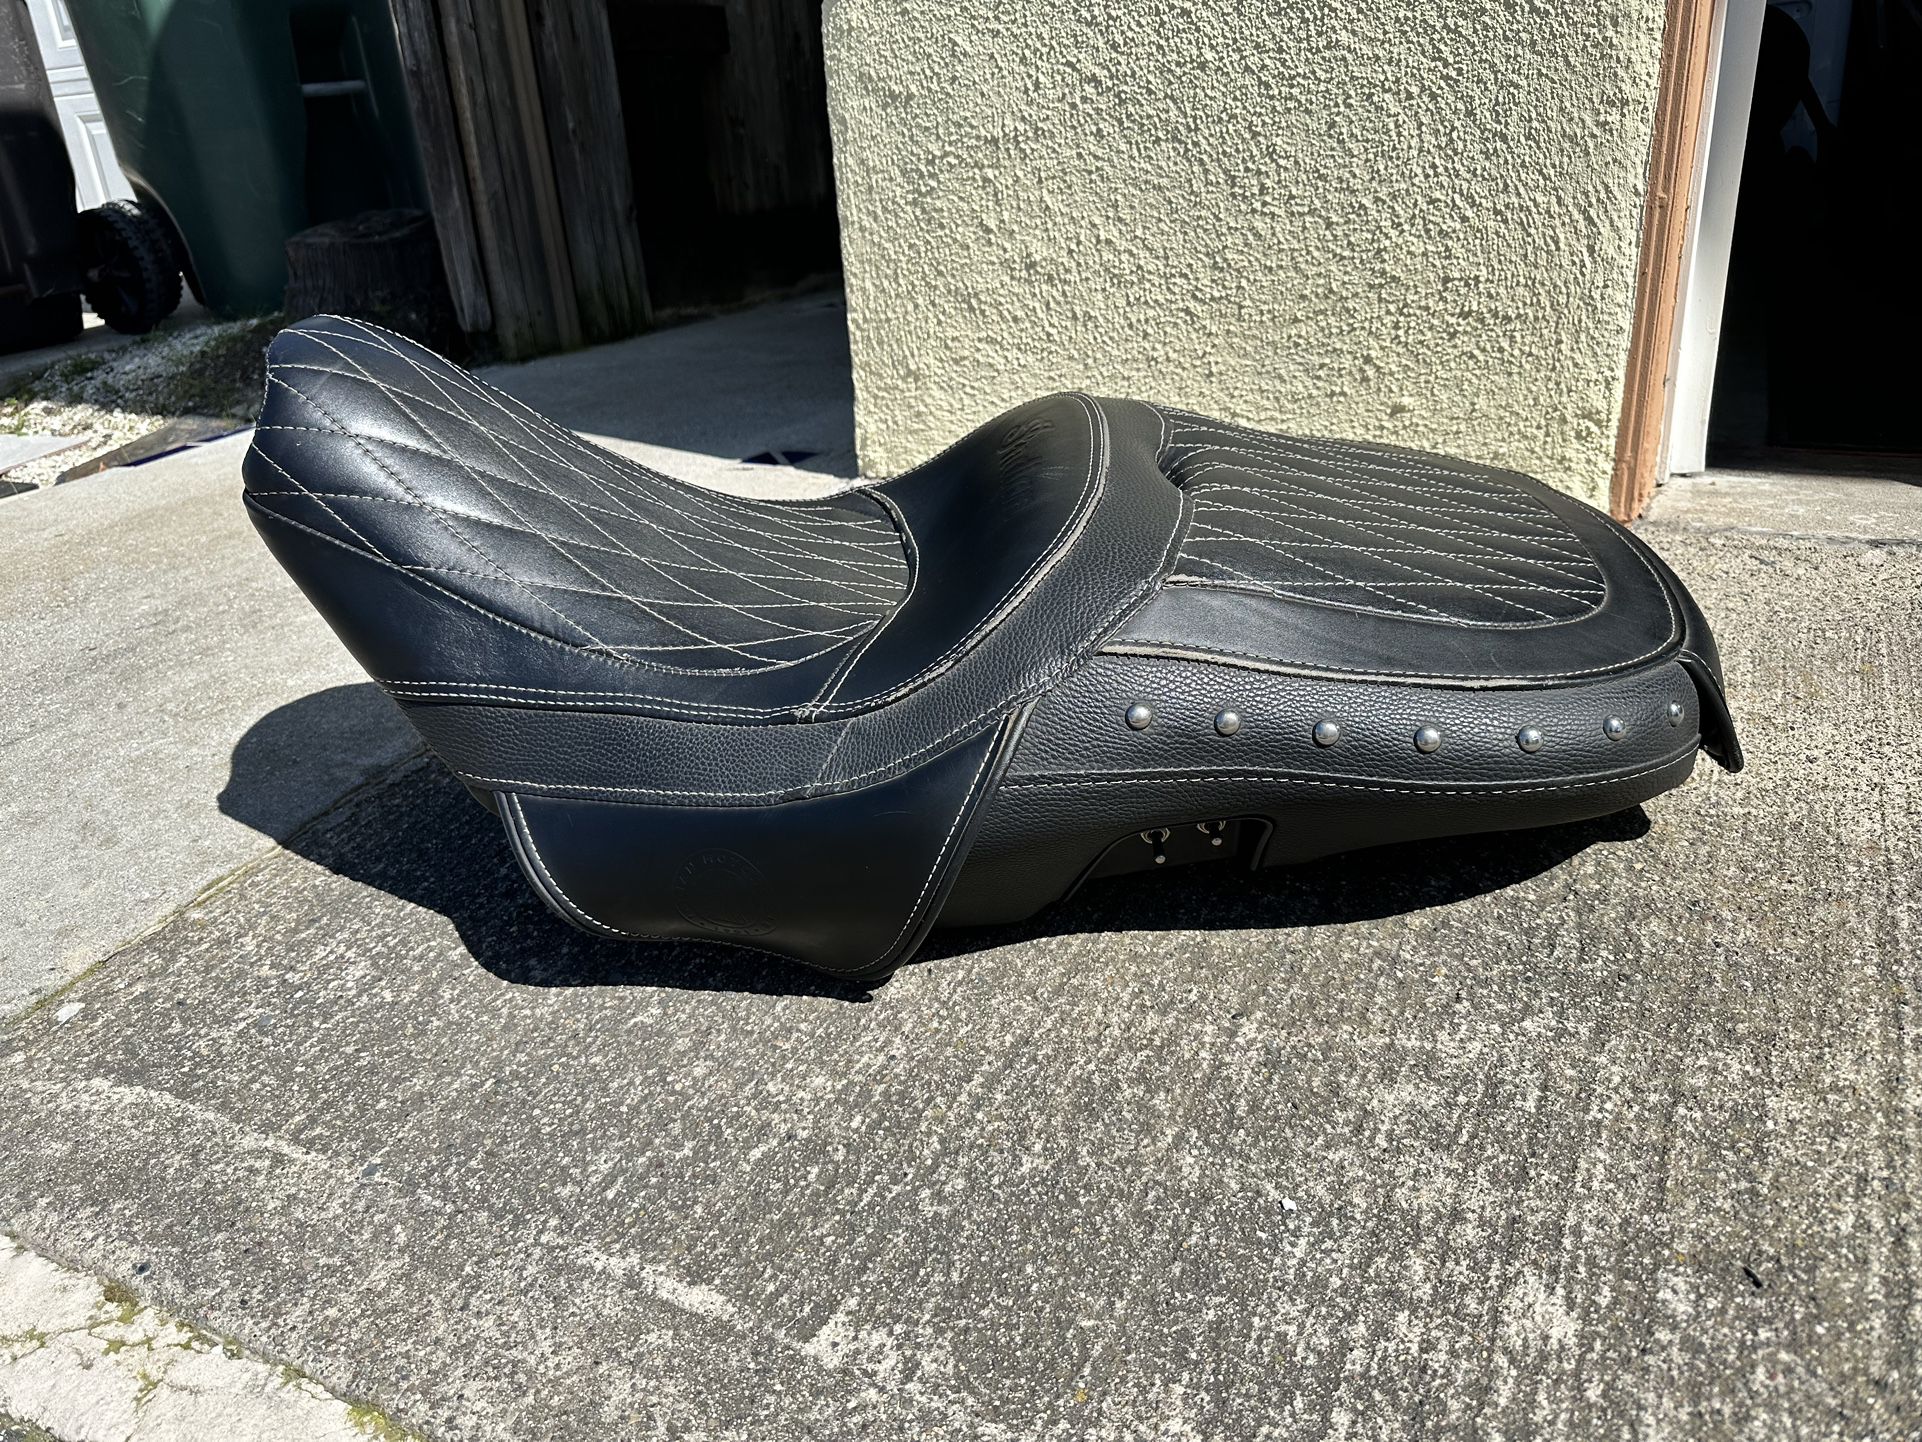 Indian  Motorcycle Heated Seat 